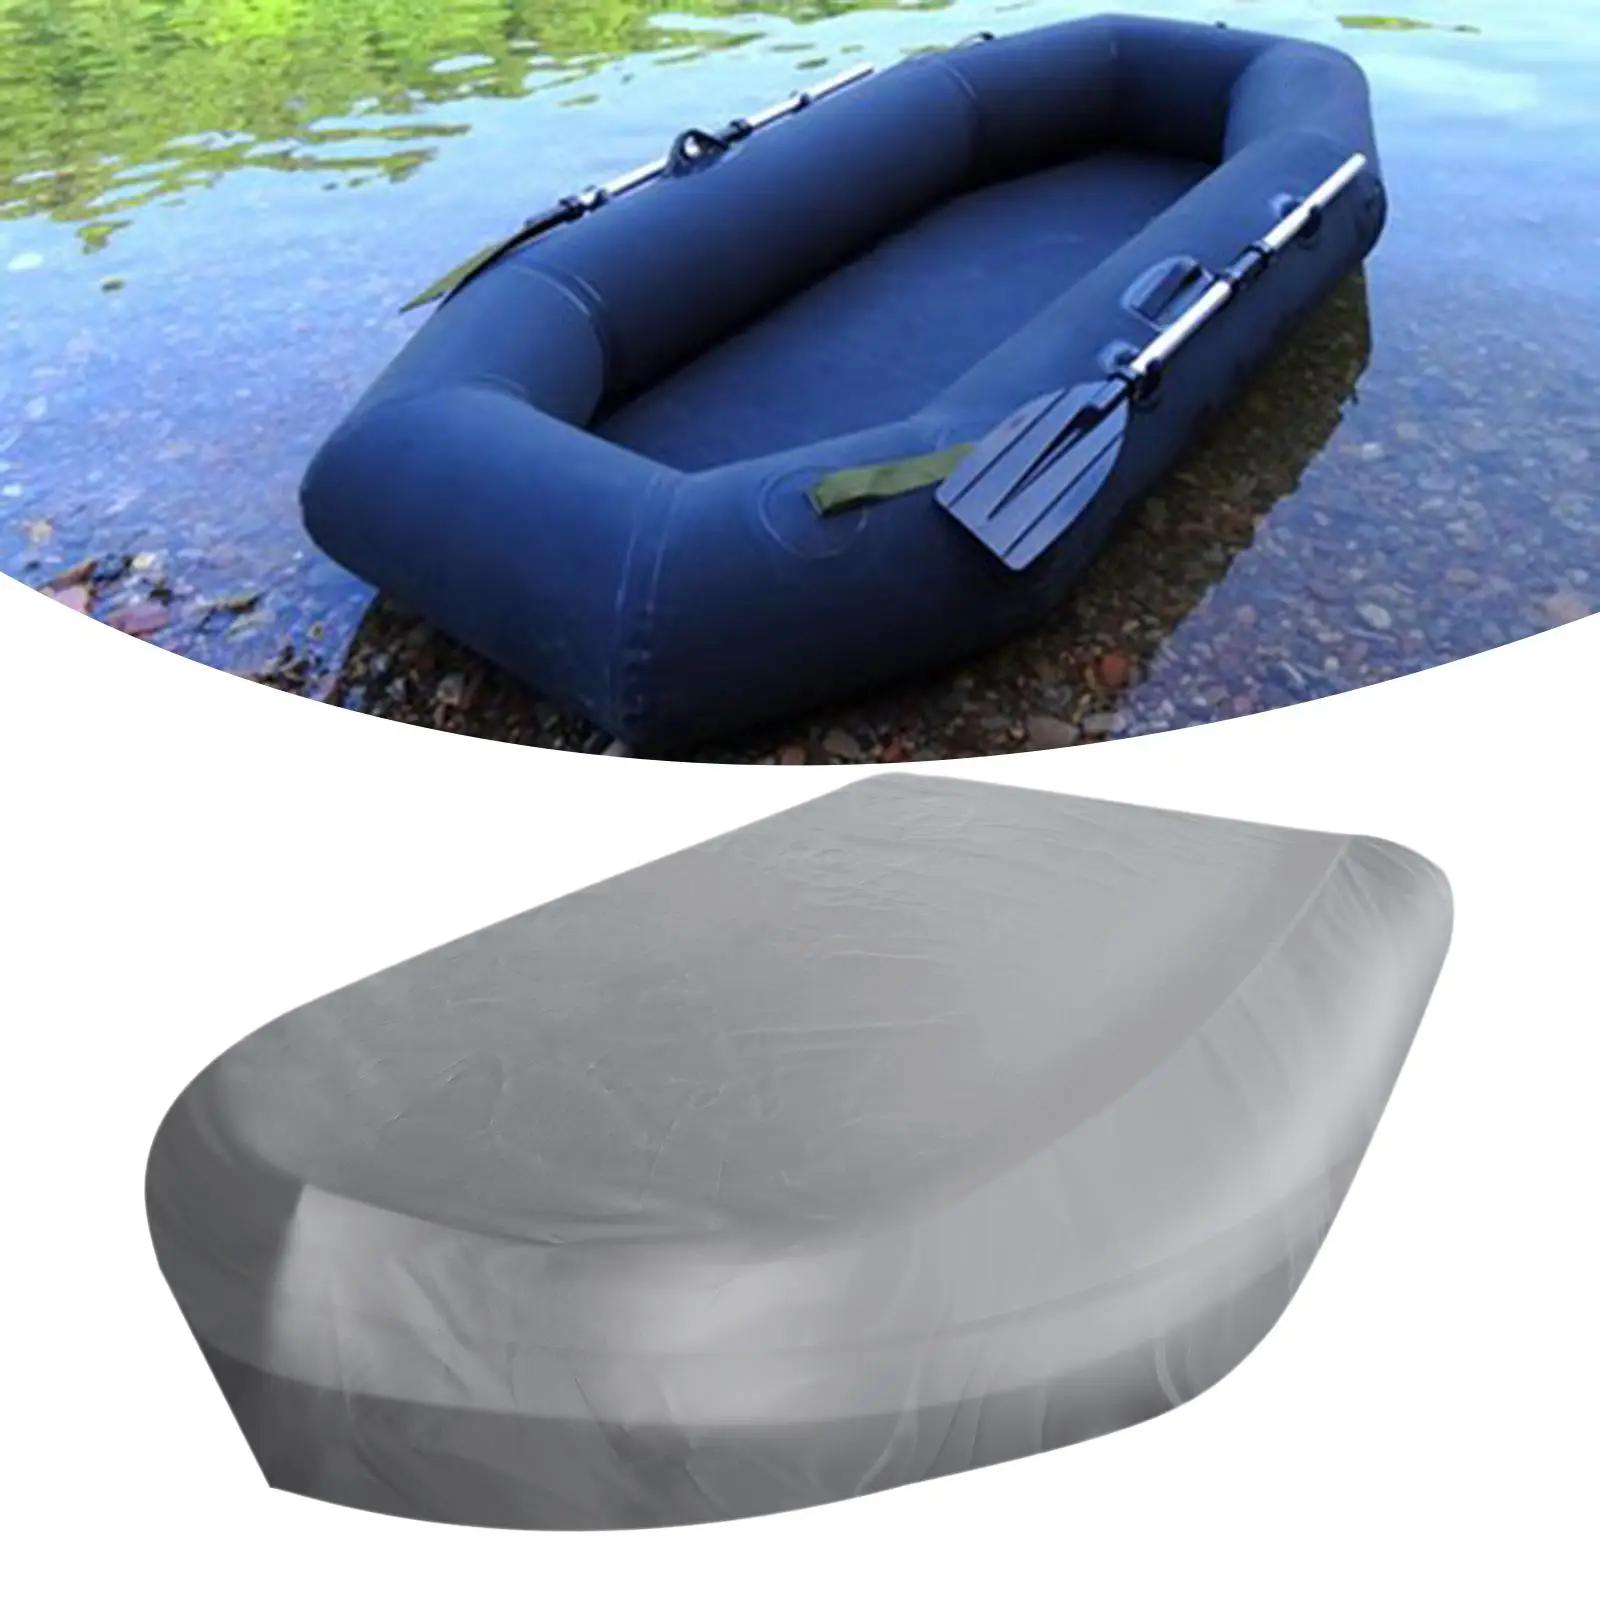 Kayak Boat Cover with Drawstring Universal Rain Resistant Marine Boat Cover for